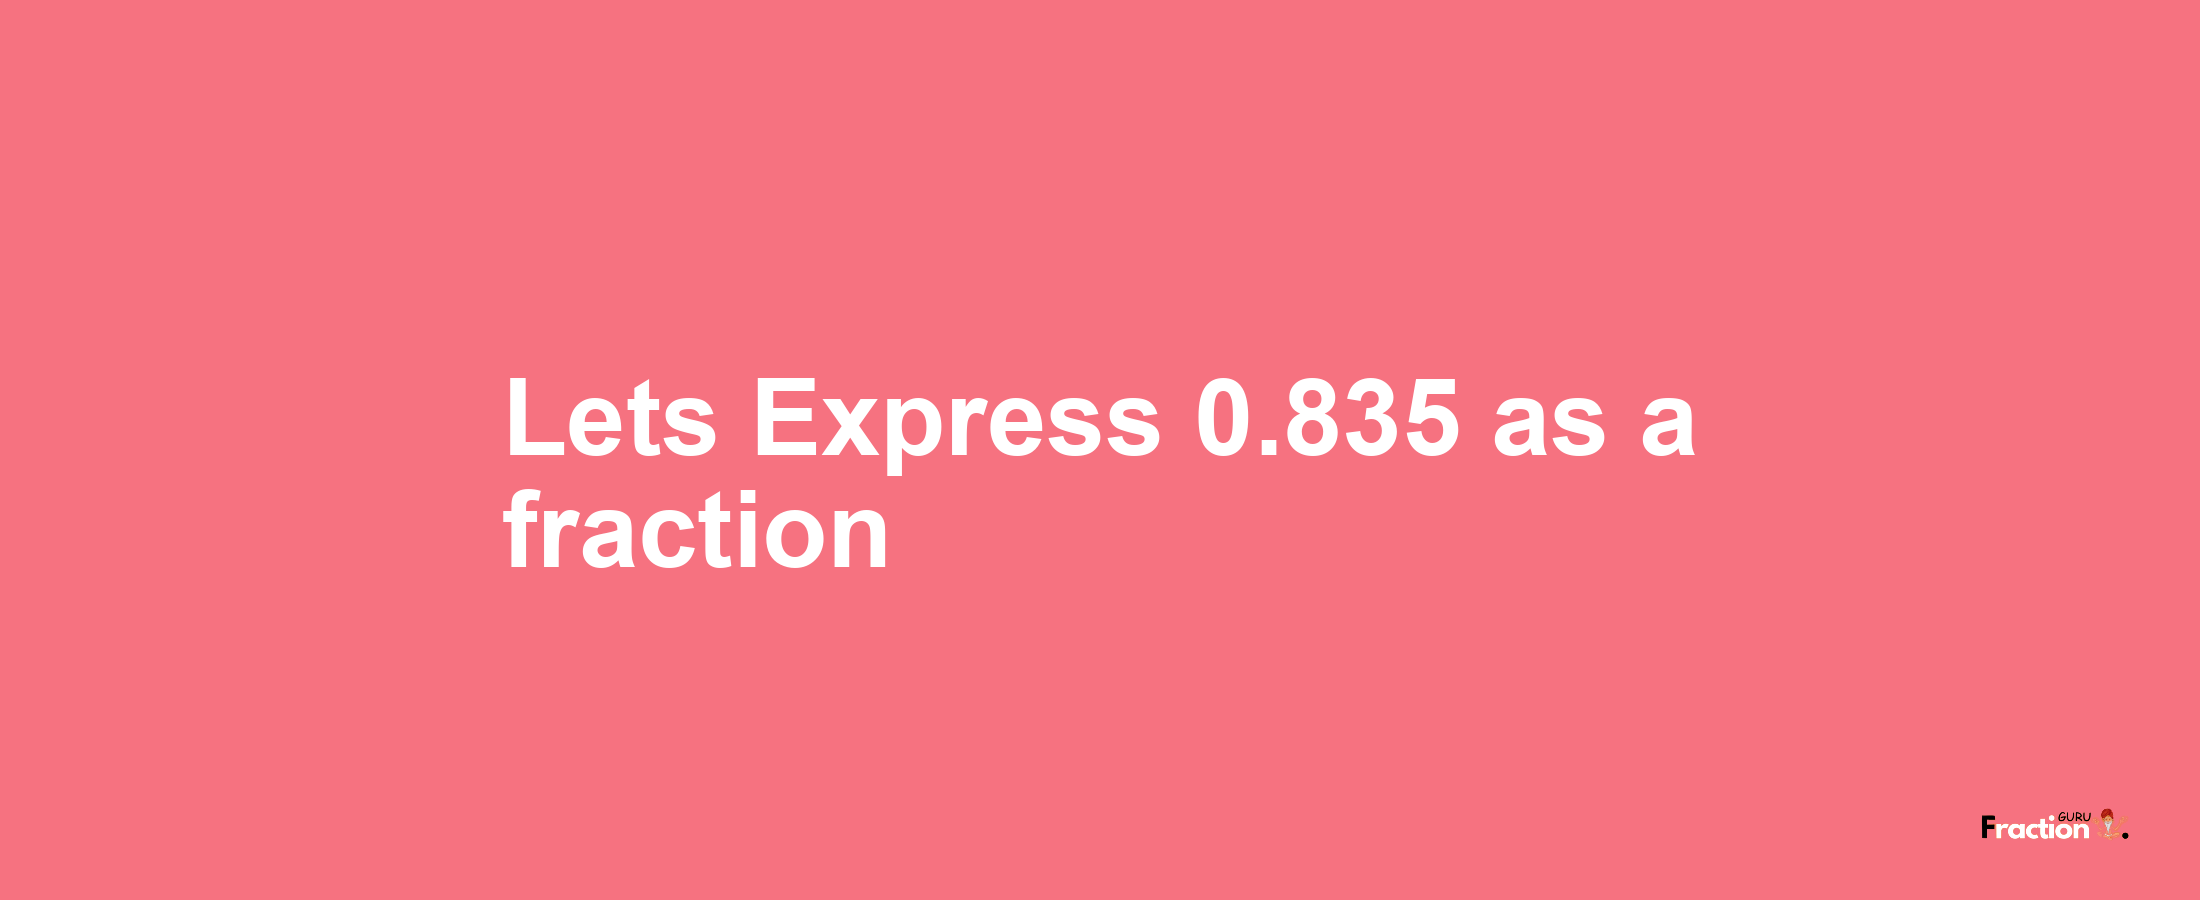 Lets Express 0.835 as afraction